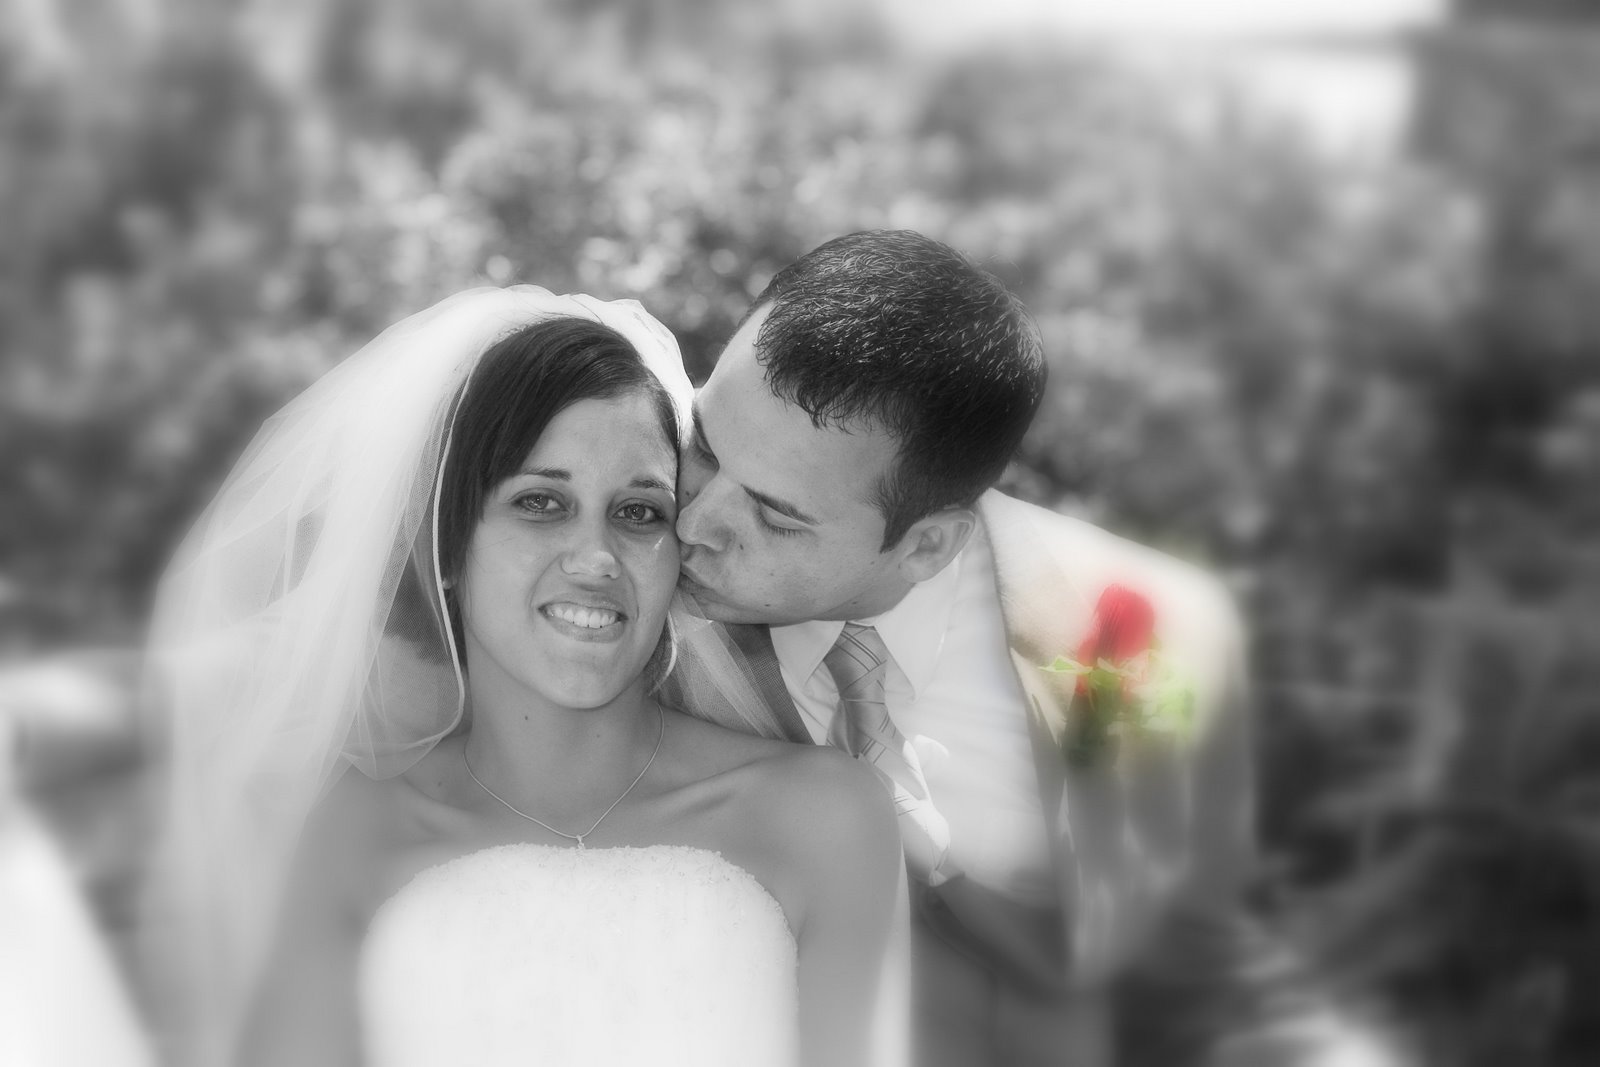 Our Wedding Day 6/16/05